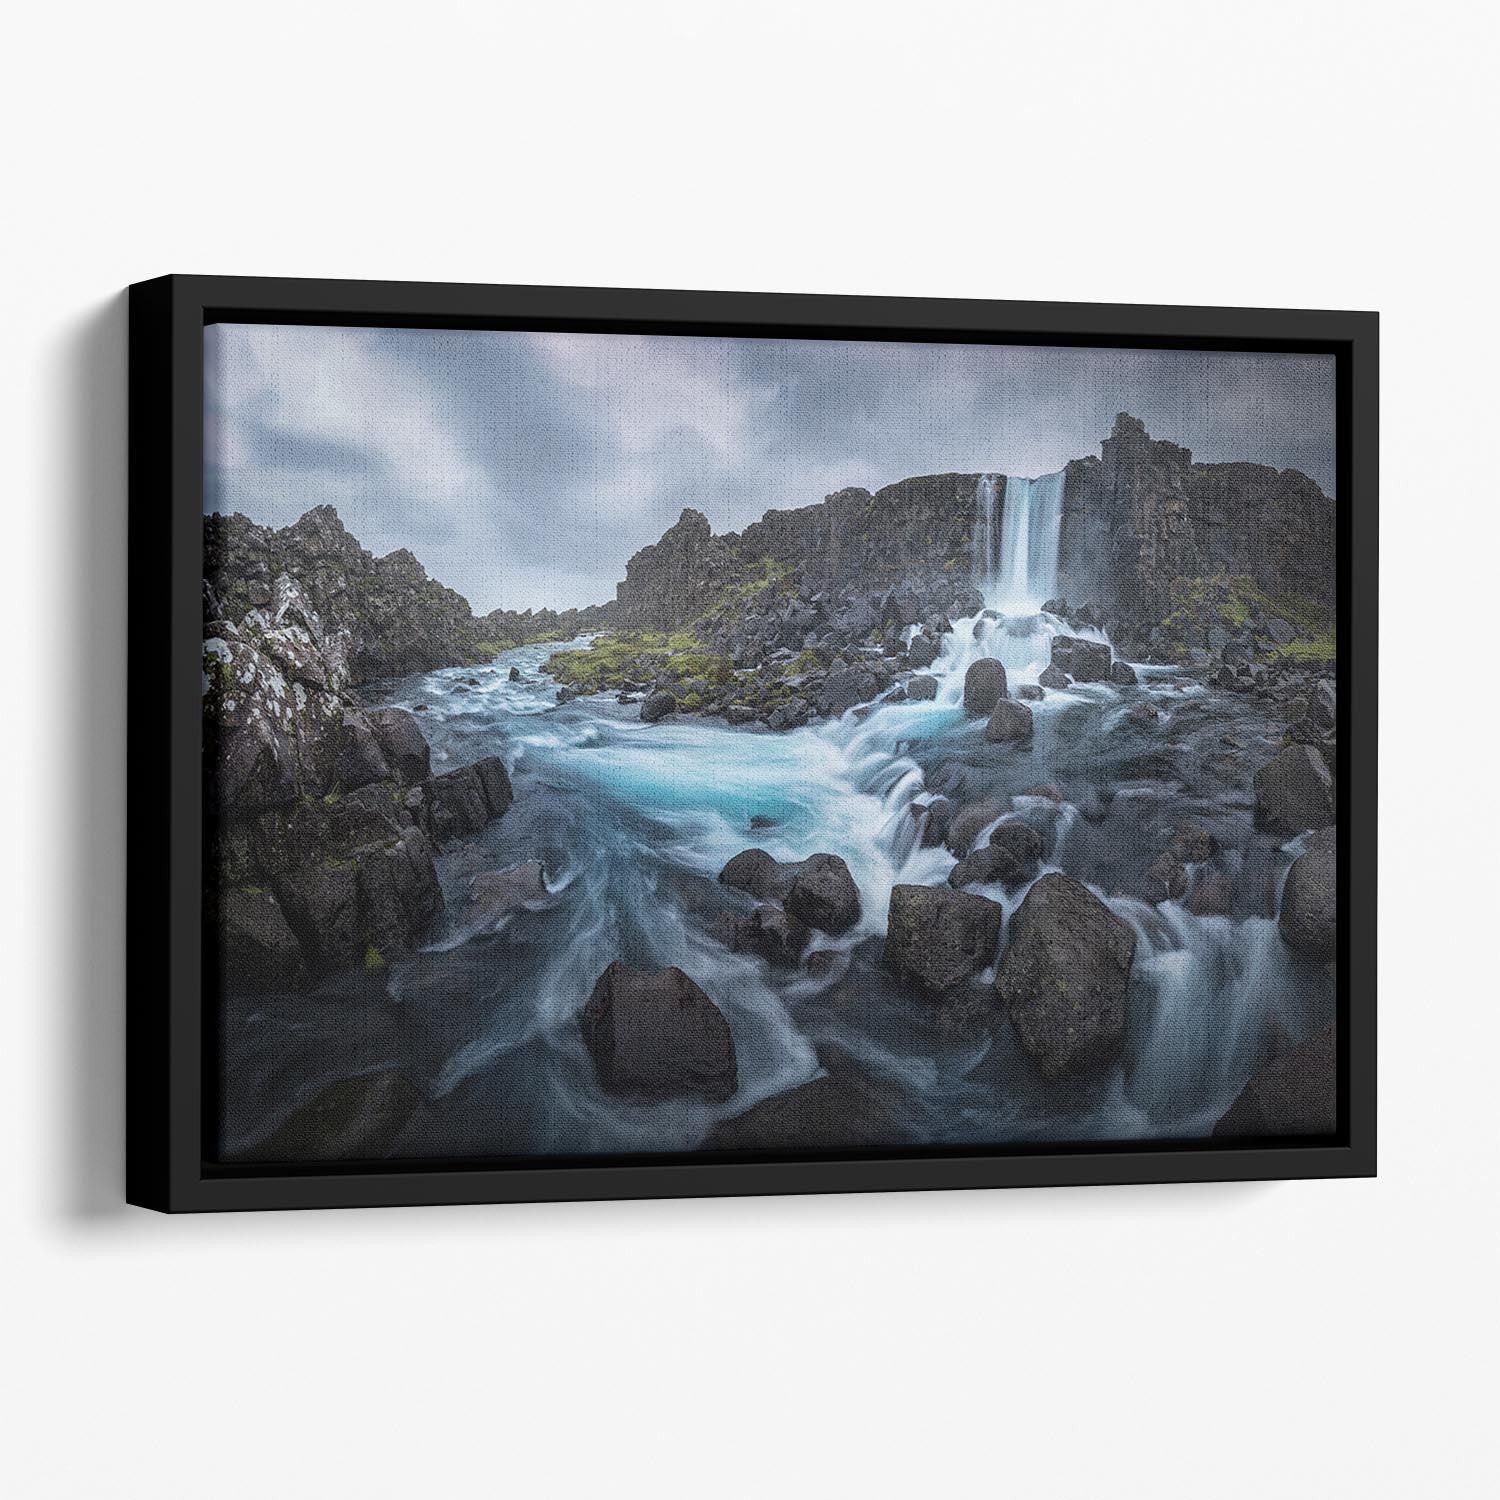 Between Continents Floating Framed Canvas - Canvas Art Rocks - 1